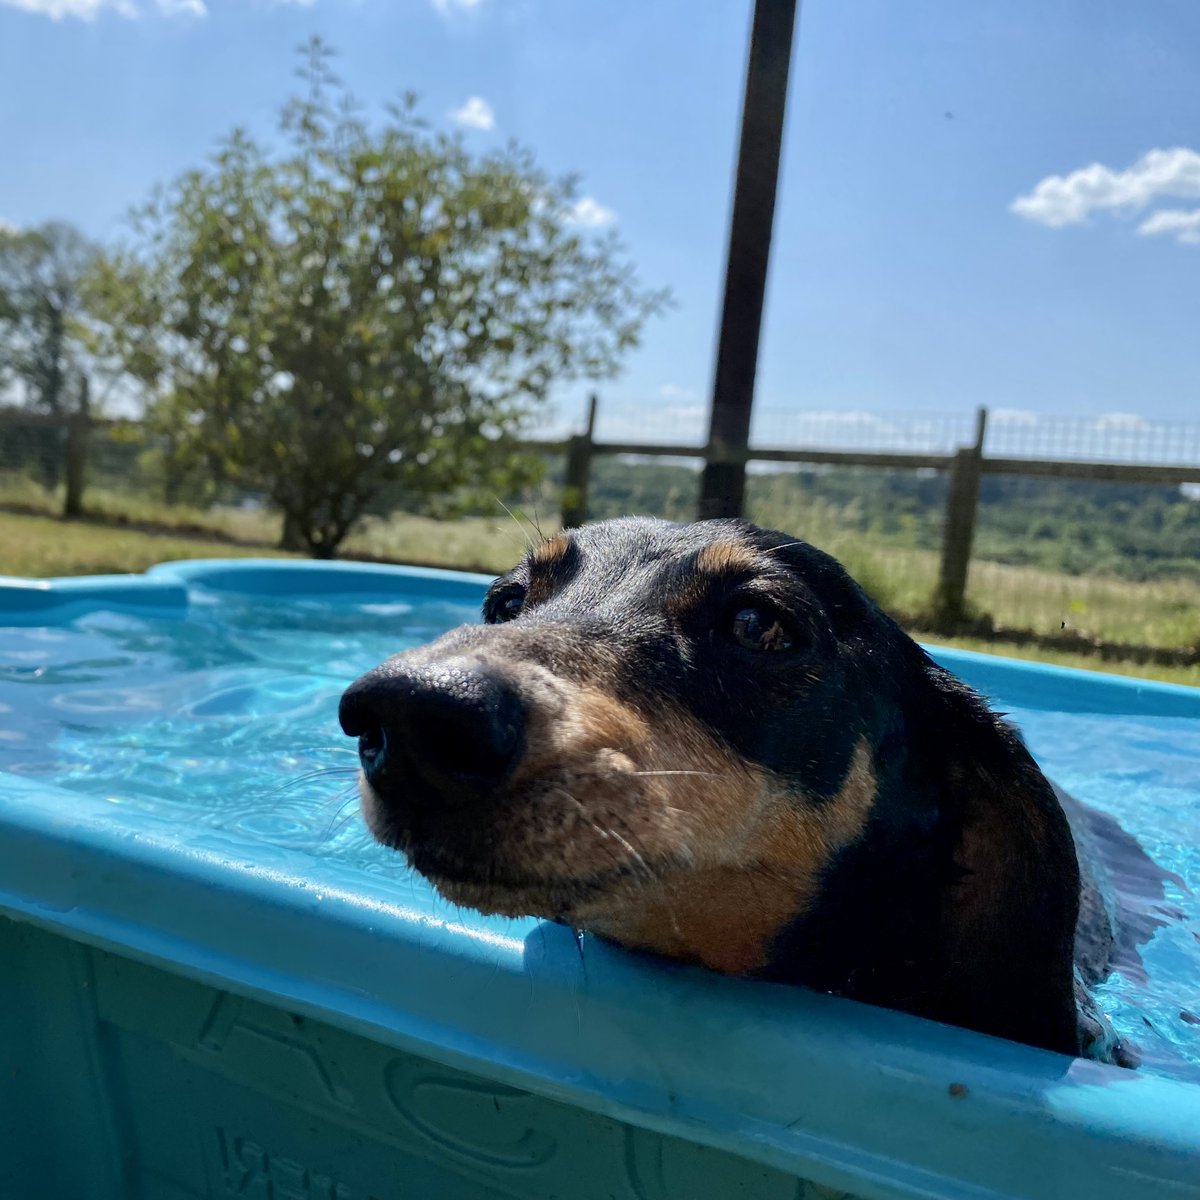 Bonnie enjoying her pool time this afternoon... 💦 #StayCool #Summer #PoolTime